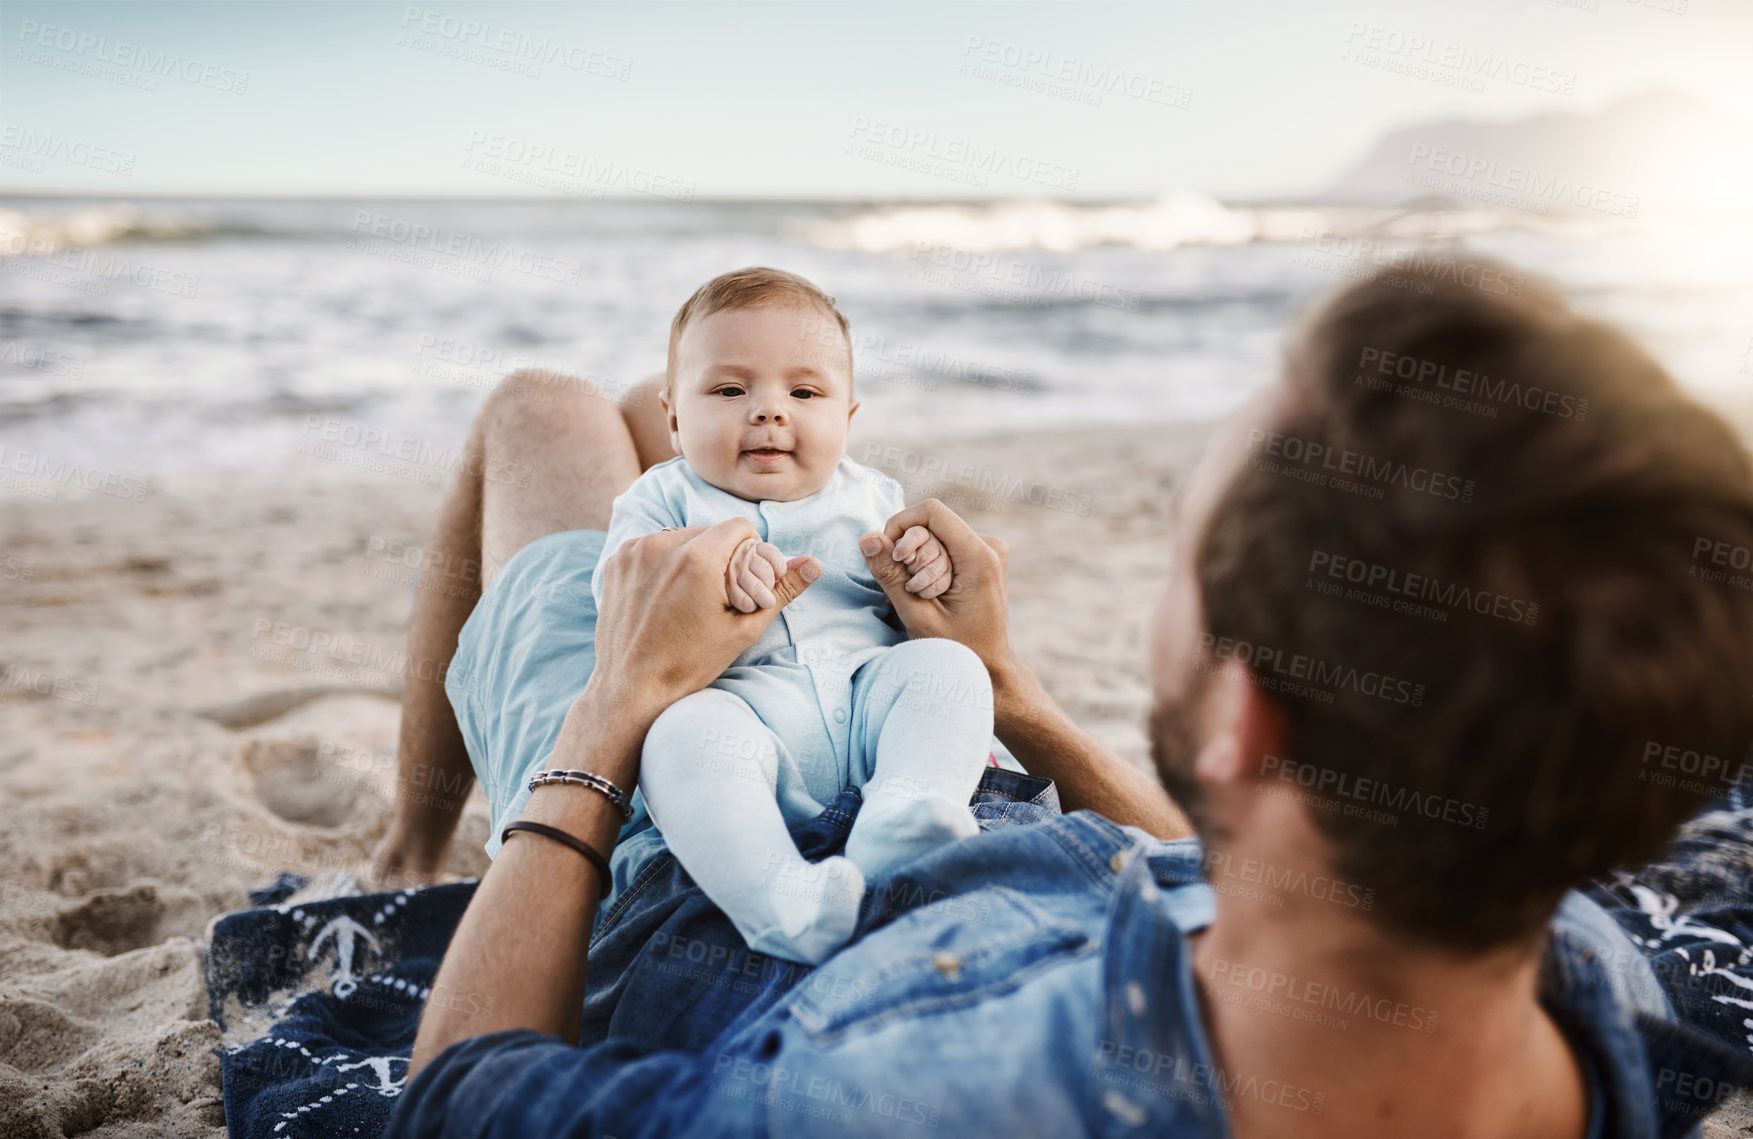 Buy stock photo Shot of a father bonding with his baby son at the beach